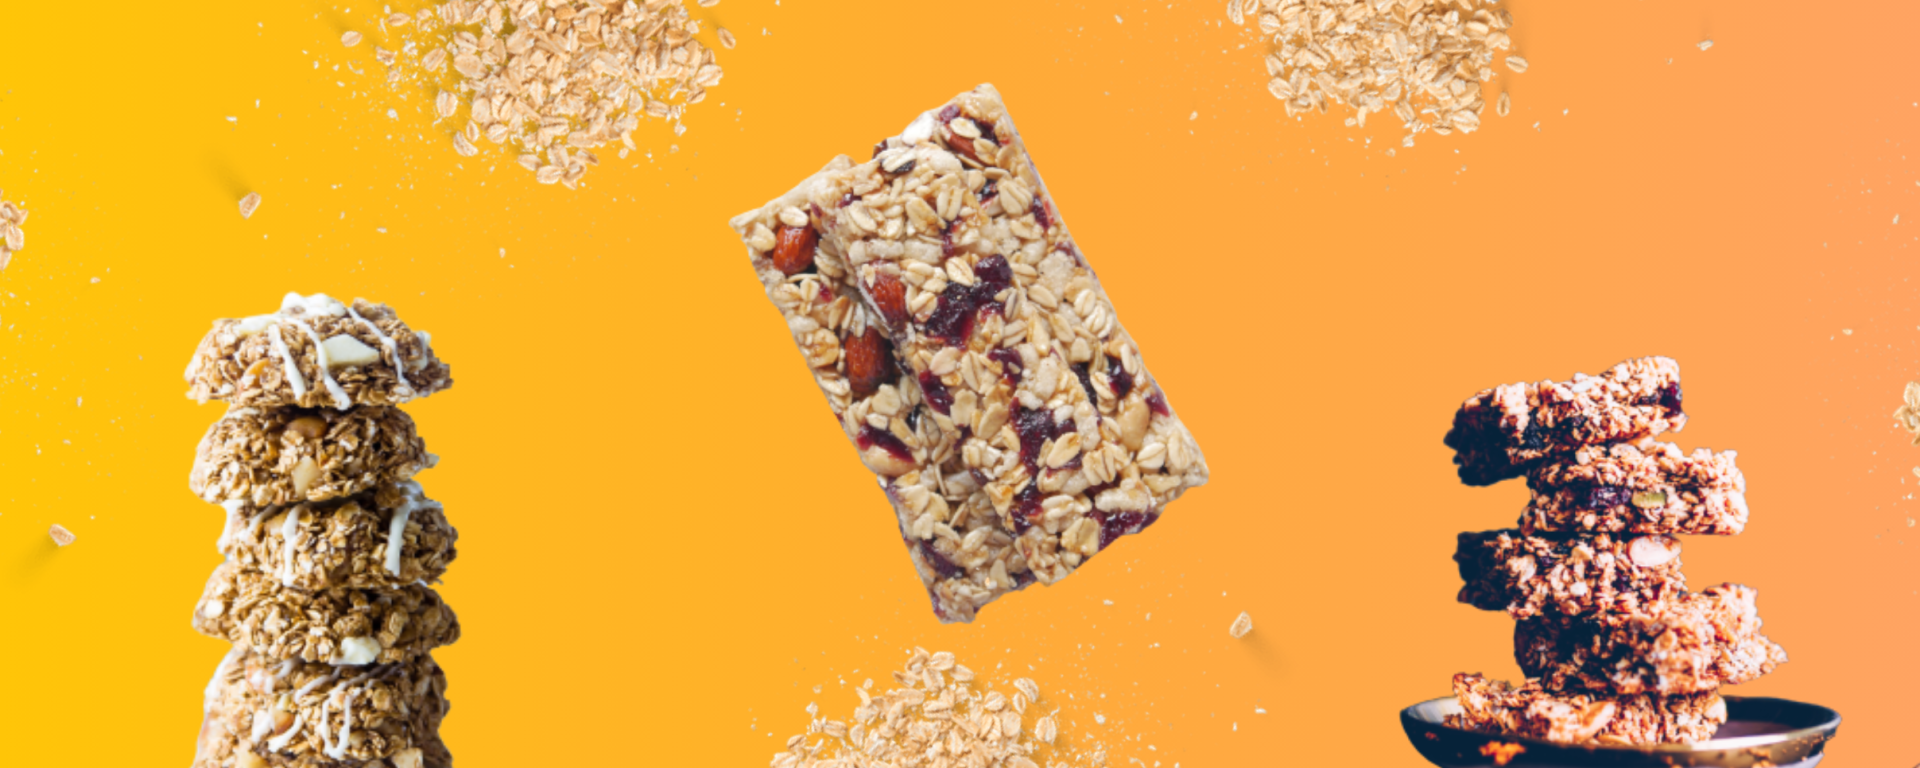 The Top 5 Granola Bars That Kids Like In Their Lunch Box For Snack Time